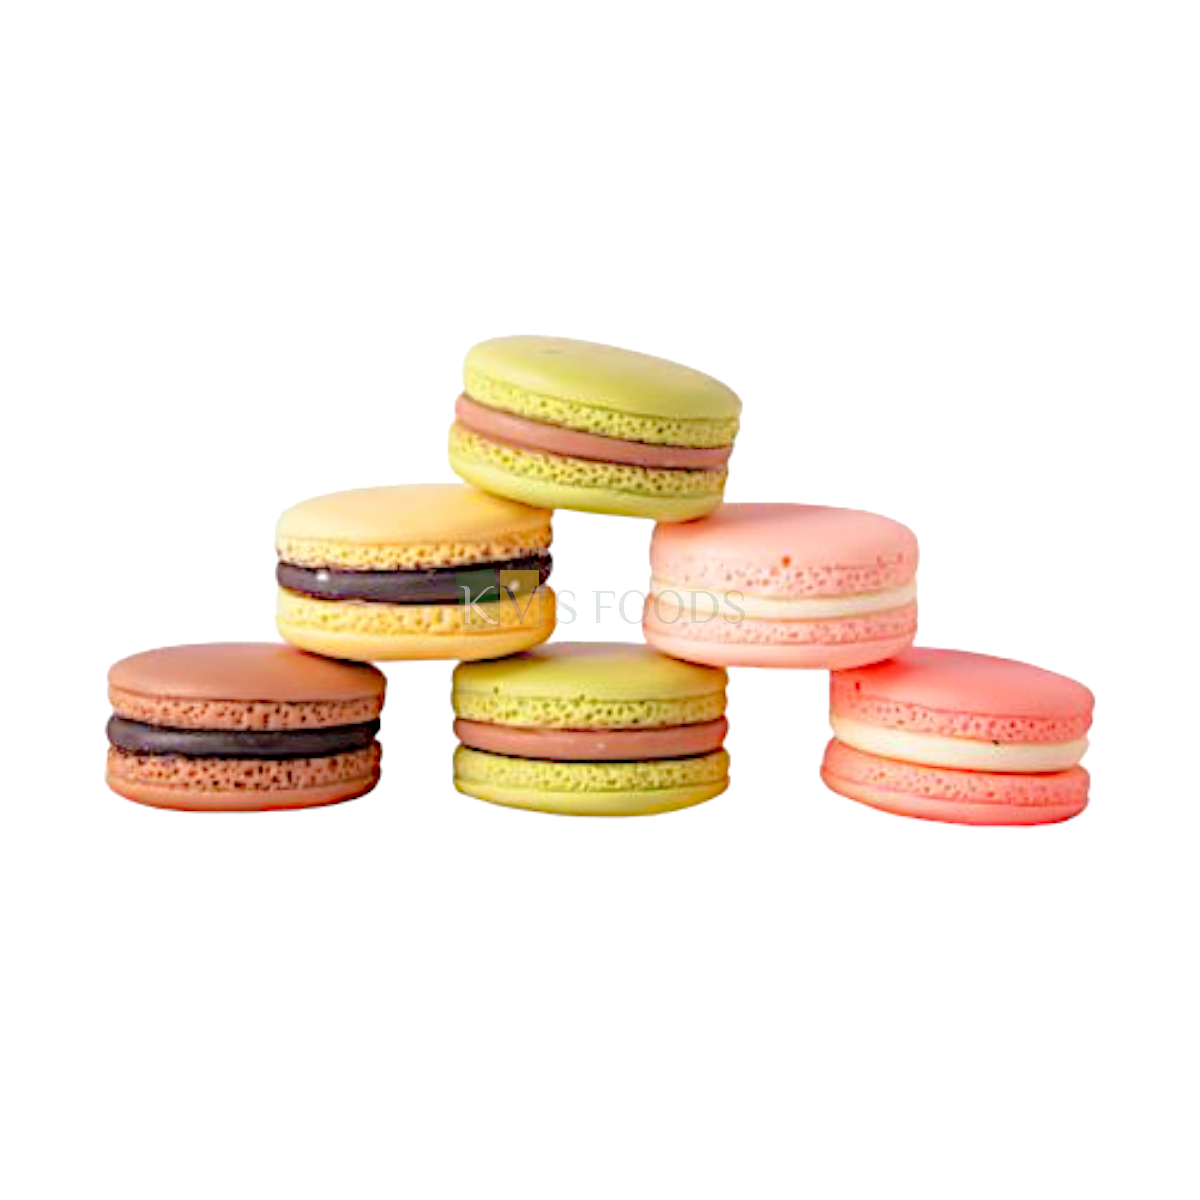 5PC Multicoloured Non Edible Dummy French Macaroon Fake Macaron Miniatures DIY Decorate Materials, For Home Kitchen Shop Market Decoration, Play Toy, Learning photography props